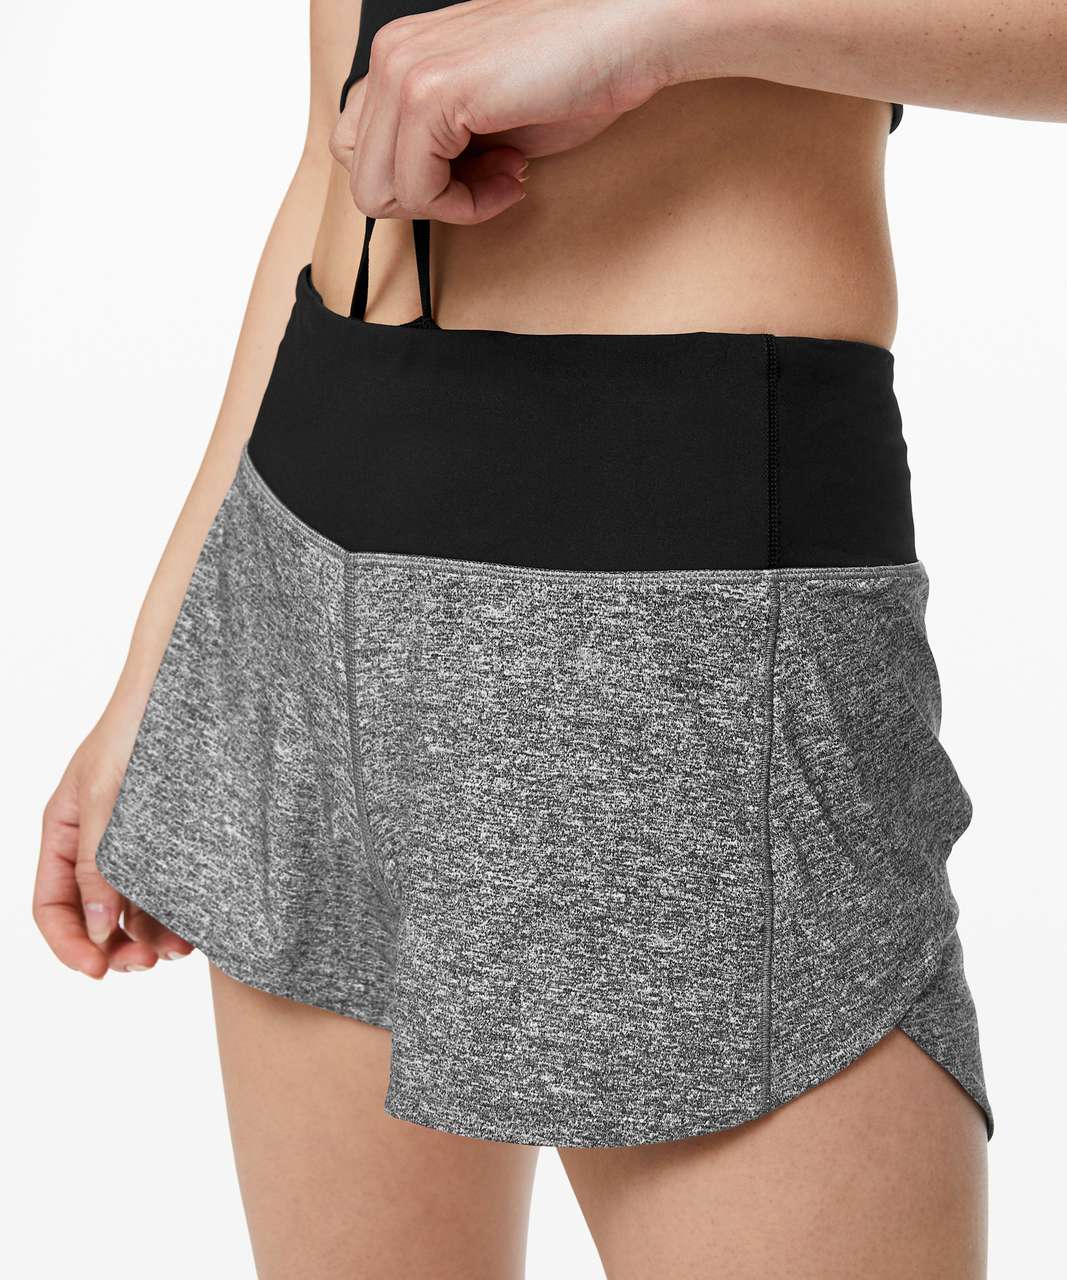 Lululemon Speed Up Short Long *4" Updated Fit - Heather Lux Multi Black / Black (First Release)